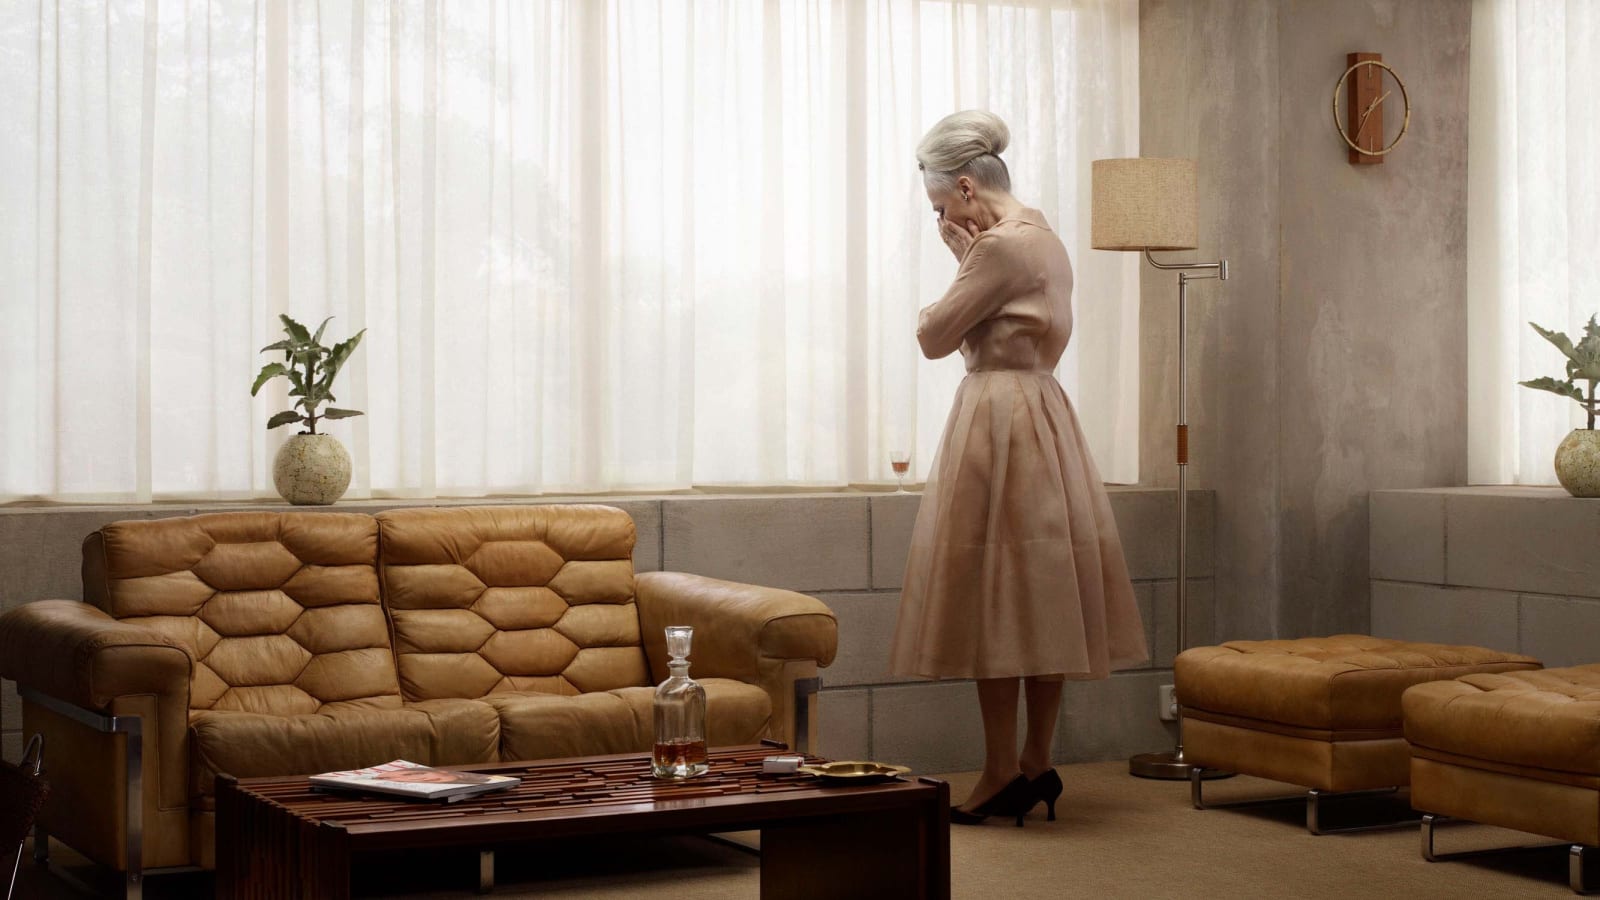 Grace standing in midcentury living room, head in hands, from the Grief series by Erwin Olaf